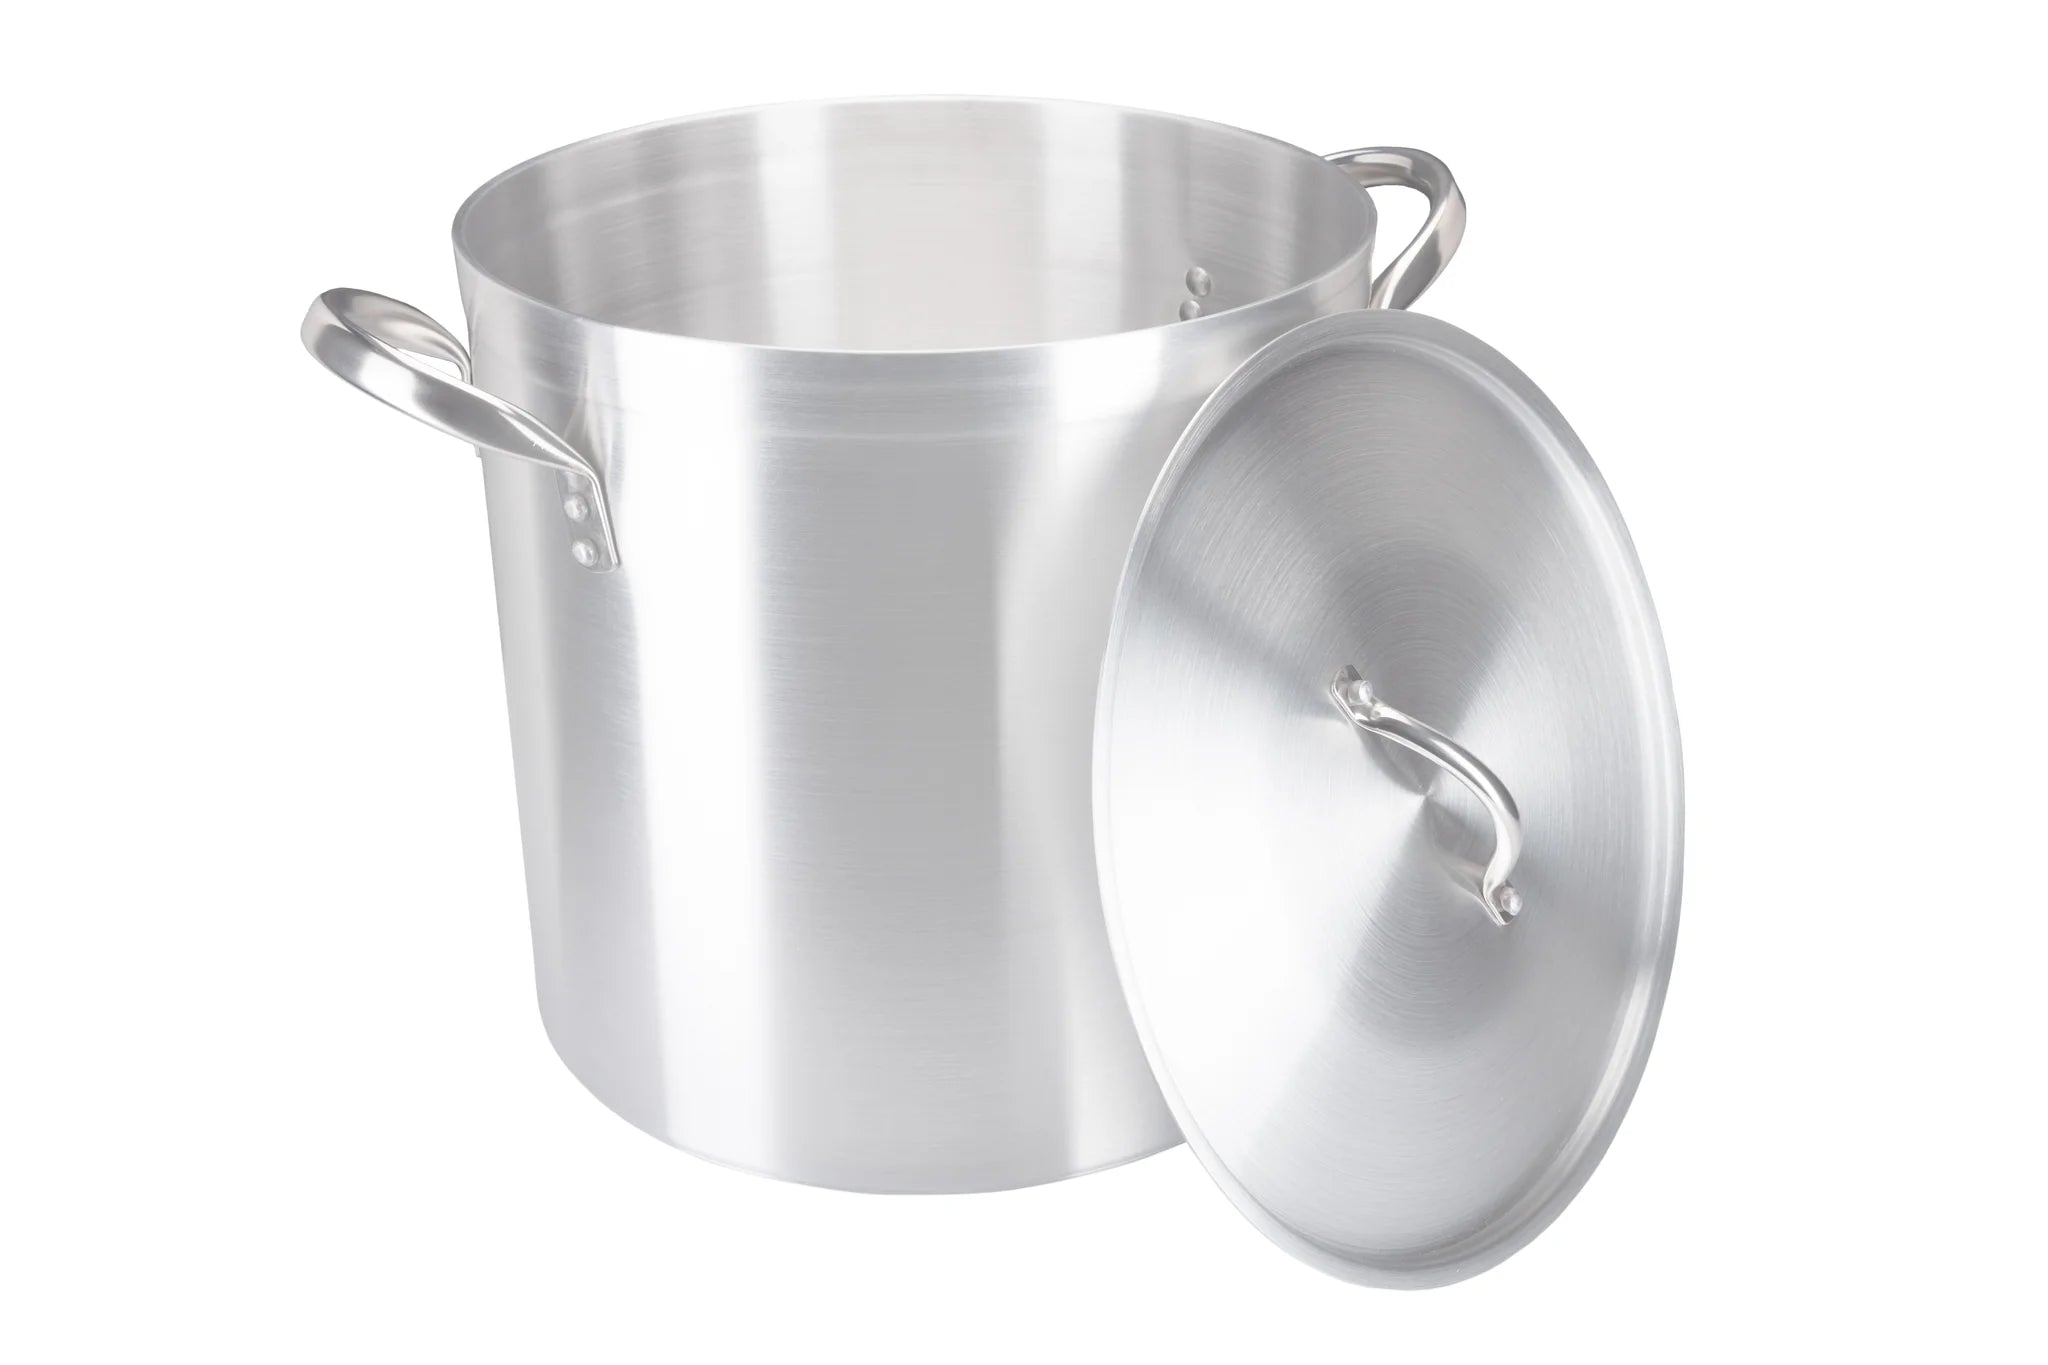 36cm Aluminium 32 LITRE Stockpot.Product Ref:00831. IN STOCK -🚚 1-3 Days Delivery